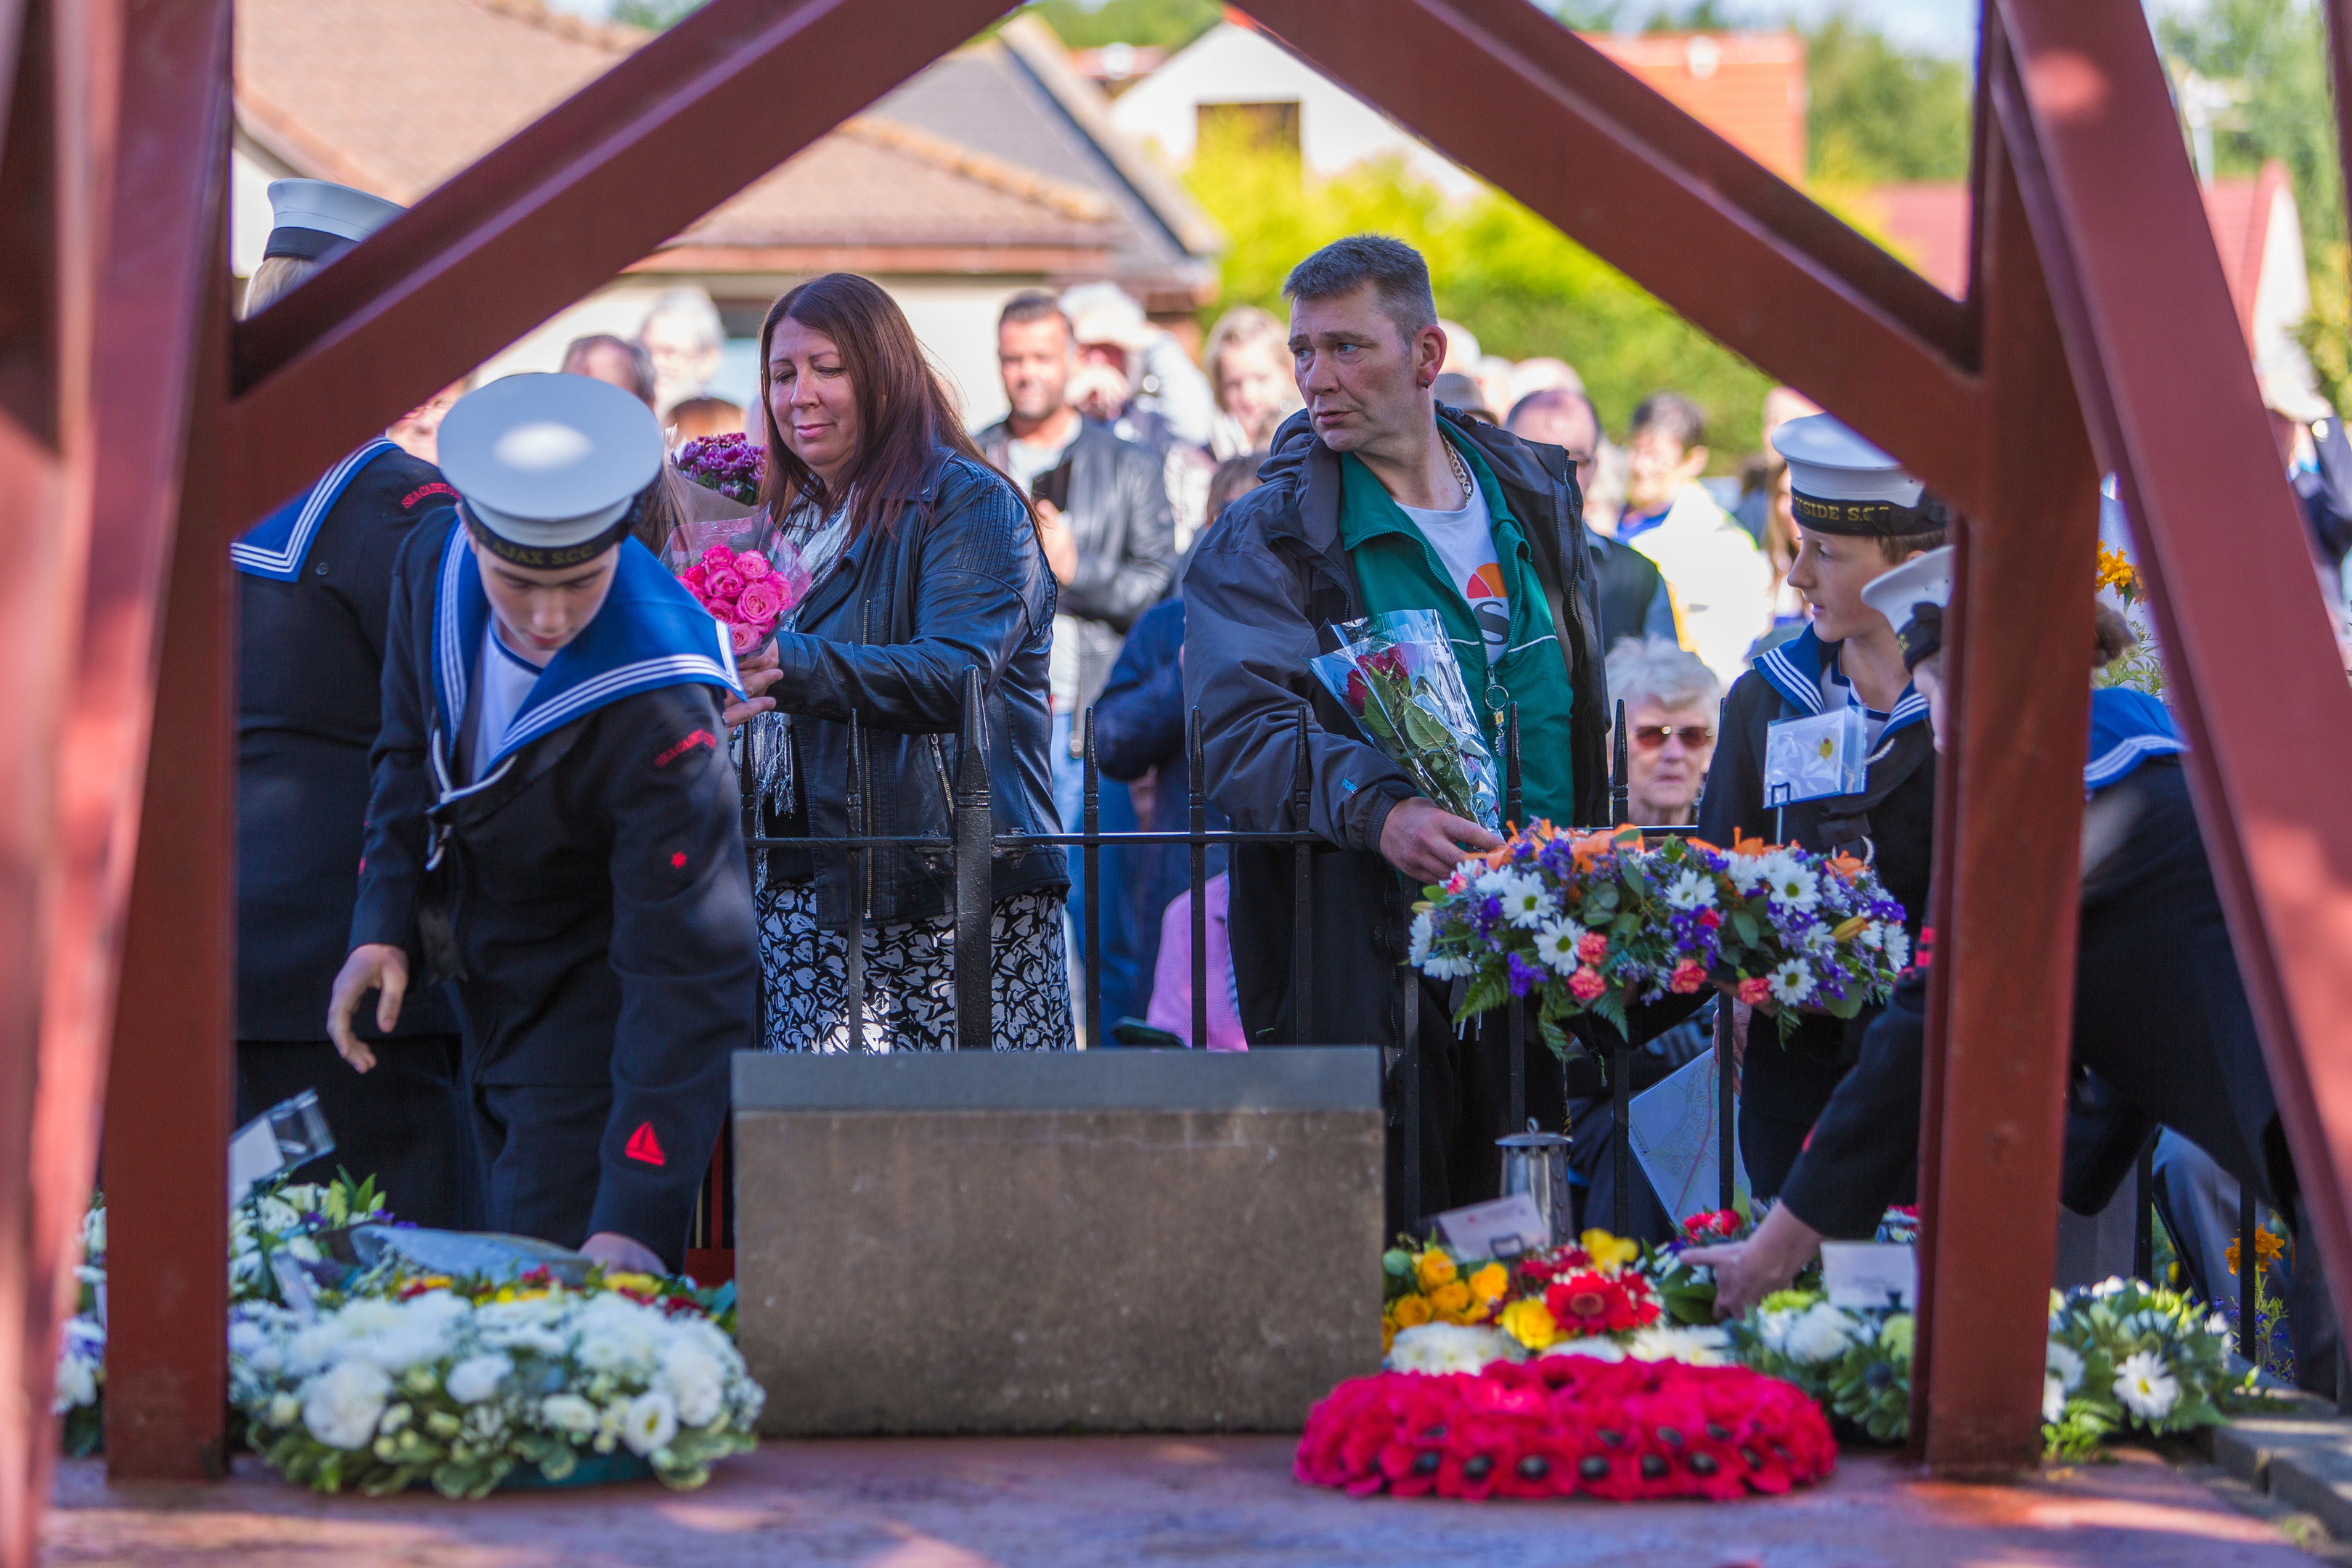 Wreaths were laid 50 years to the day after the Michael Colliery disaster